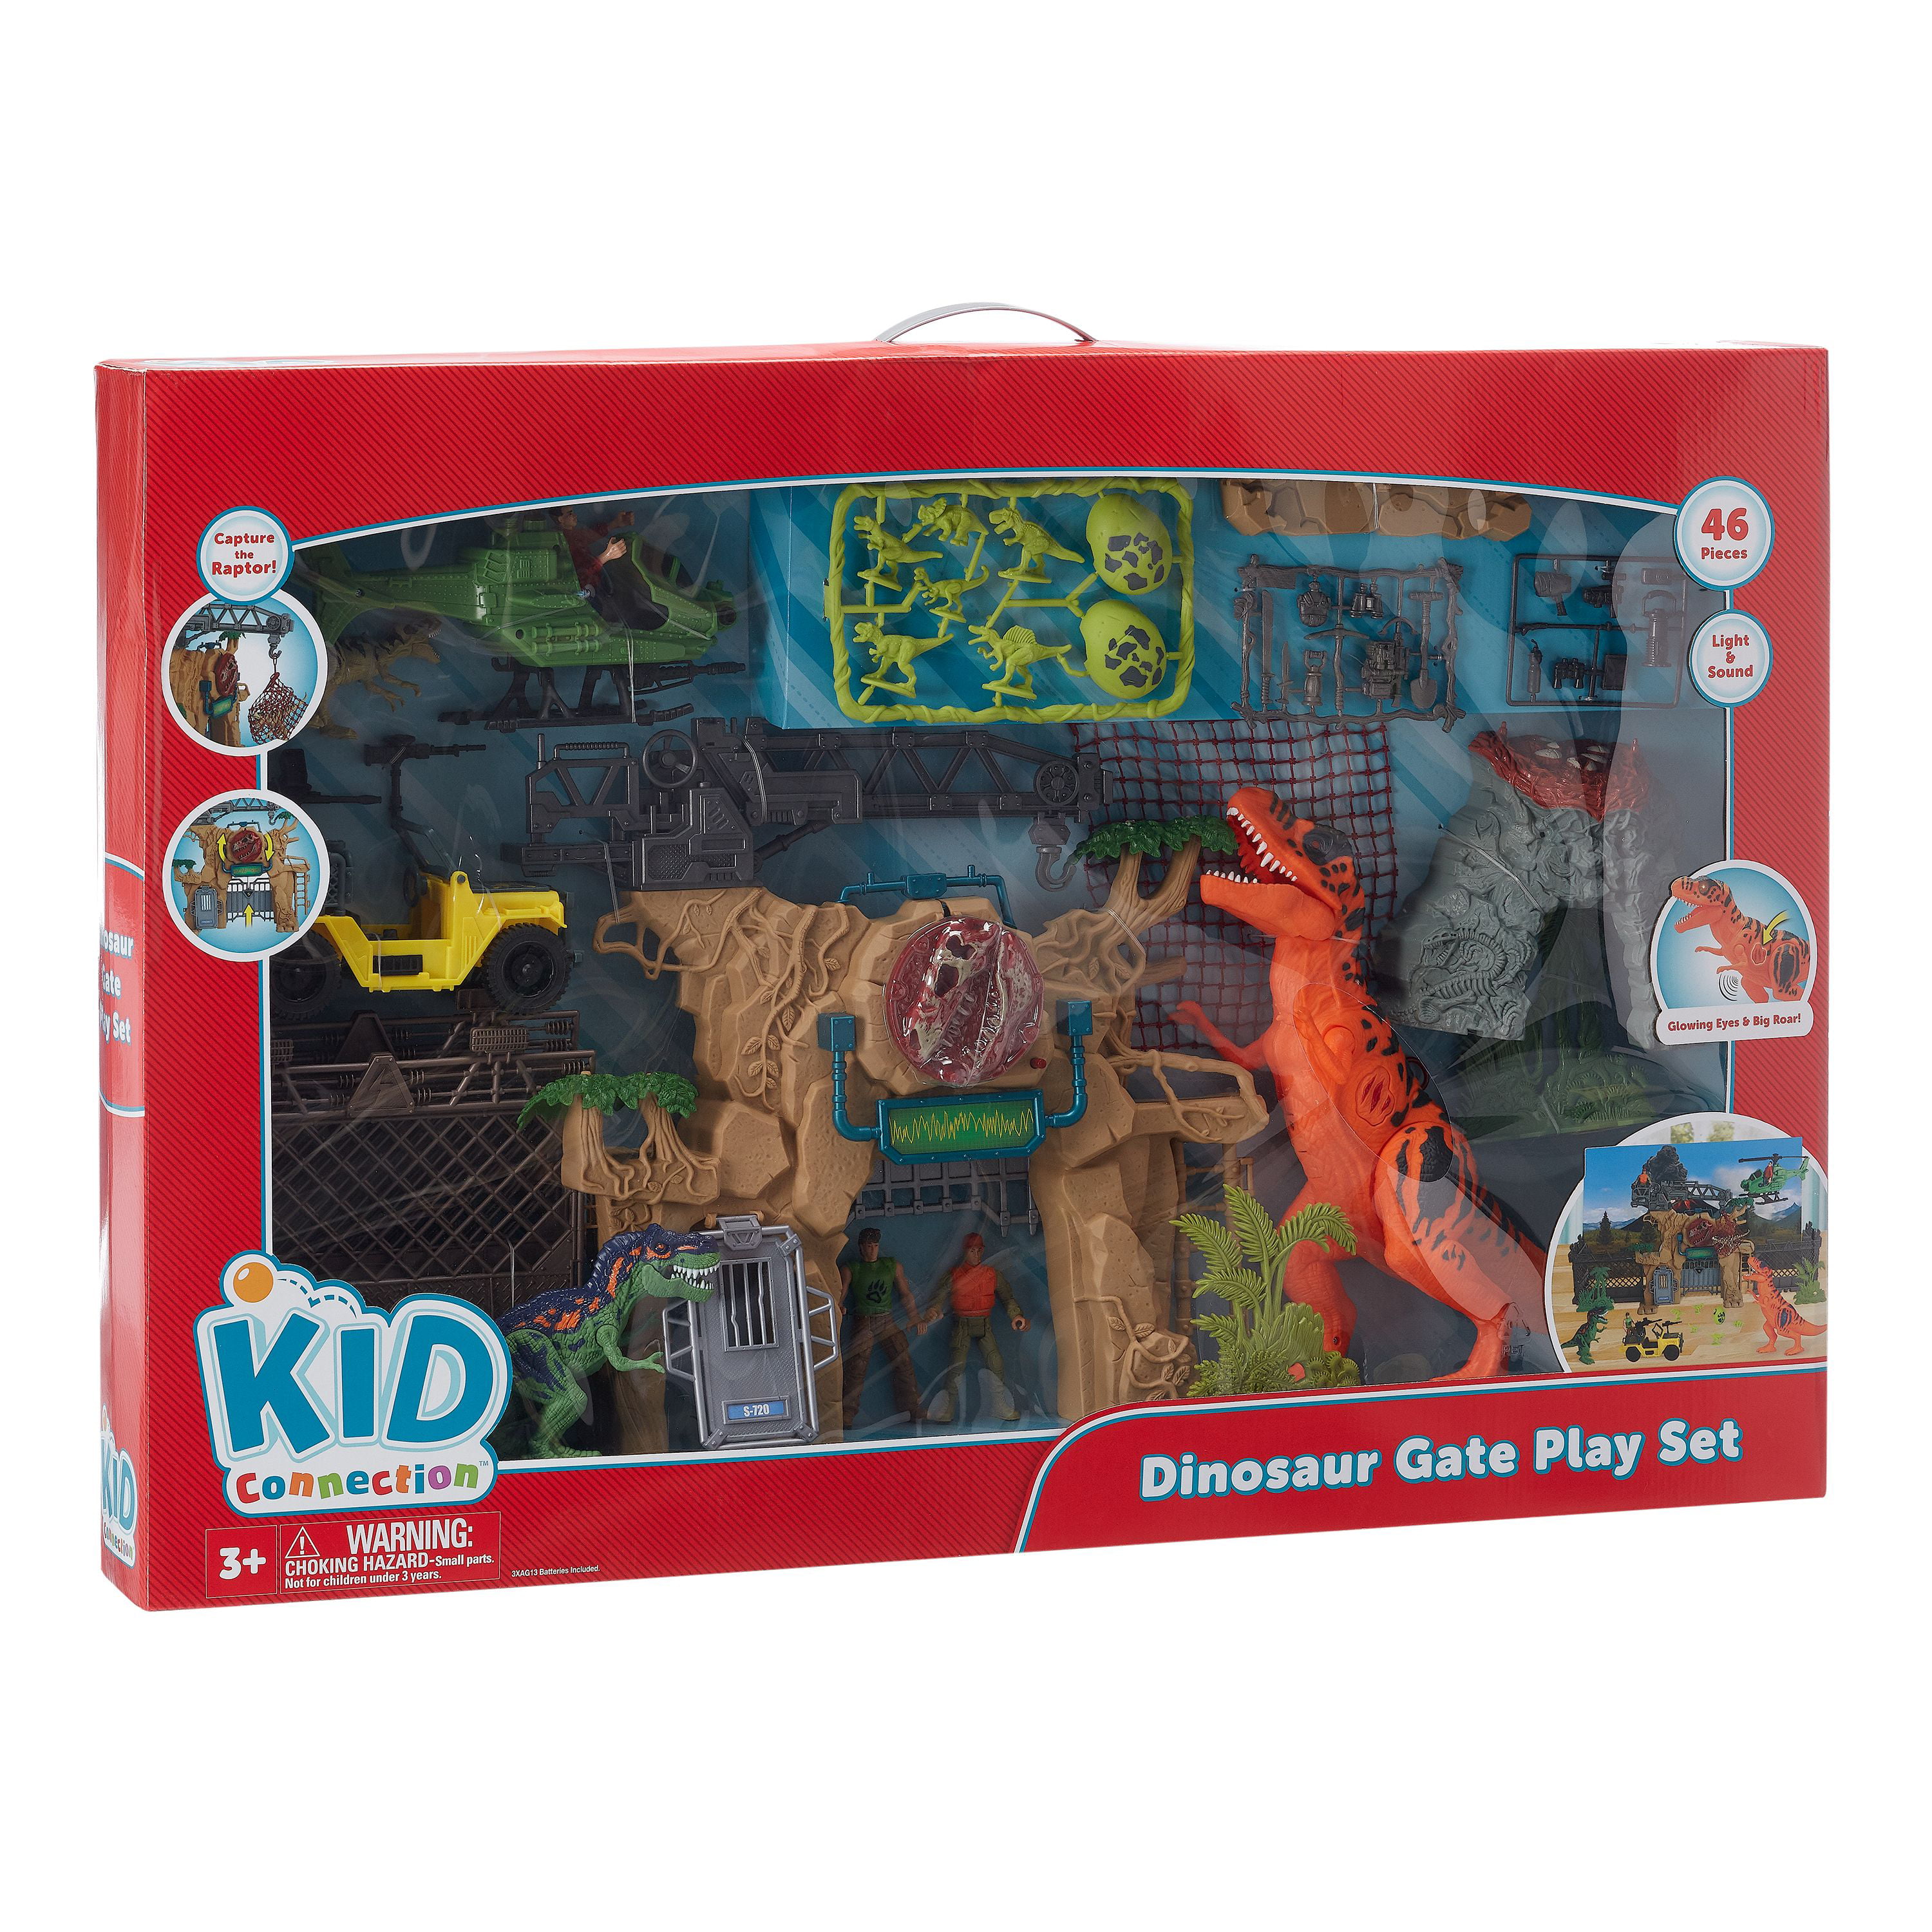 New In Box!! Kid Connection Dinosaur Gate Play Set 46 piece 